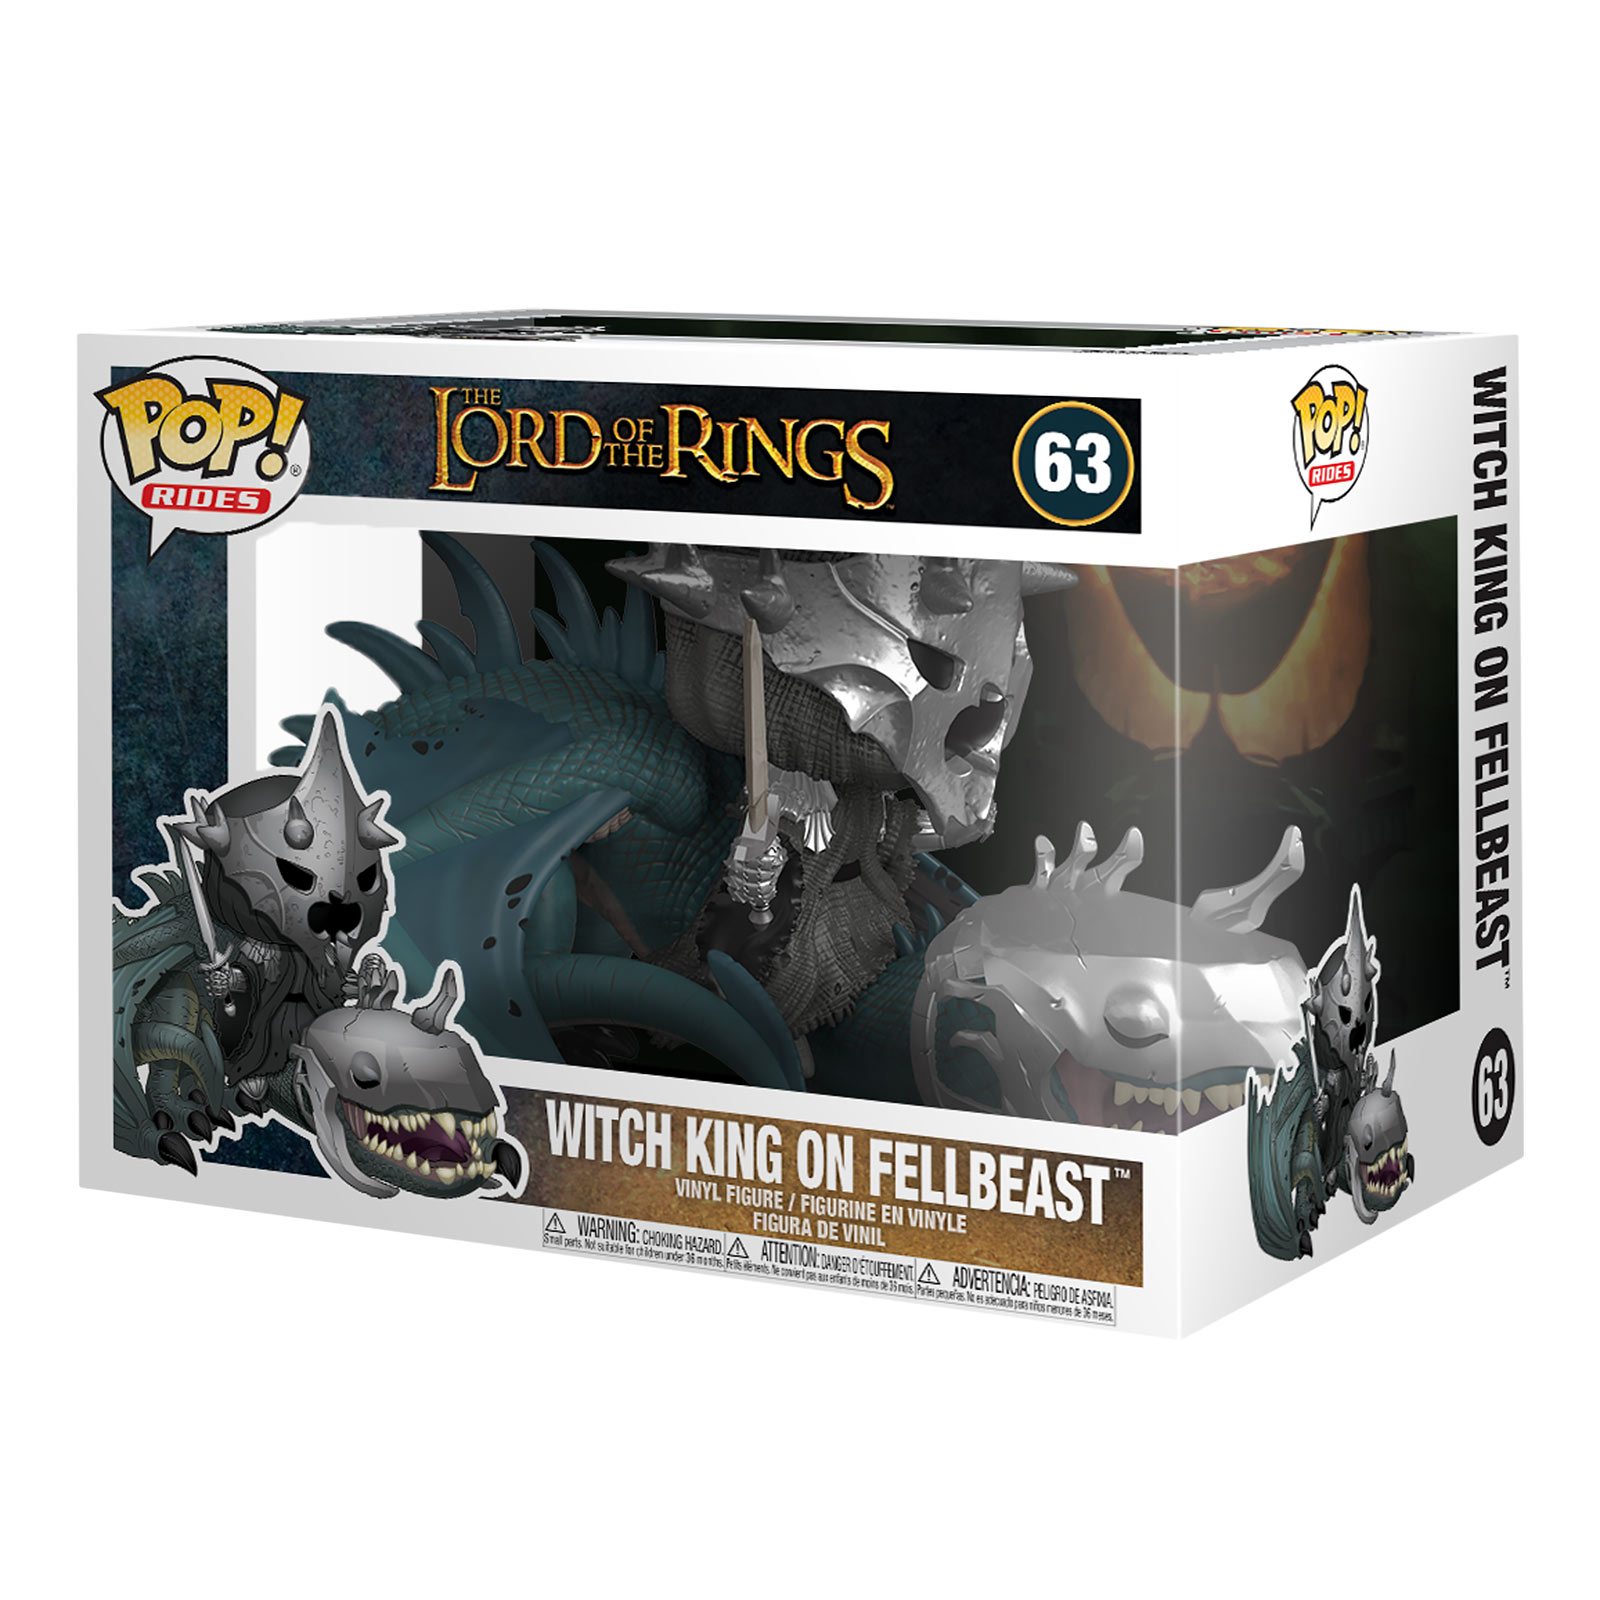 Lord of the Rings - Witch King on Winged Creature Funko Pop Figurine